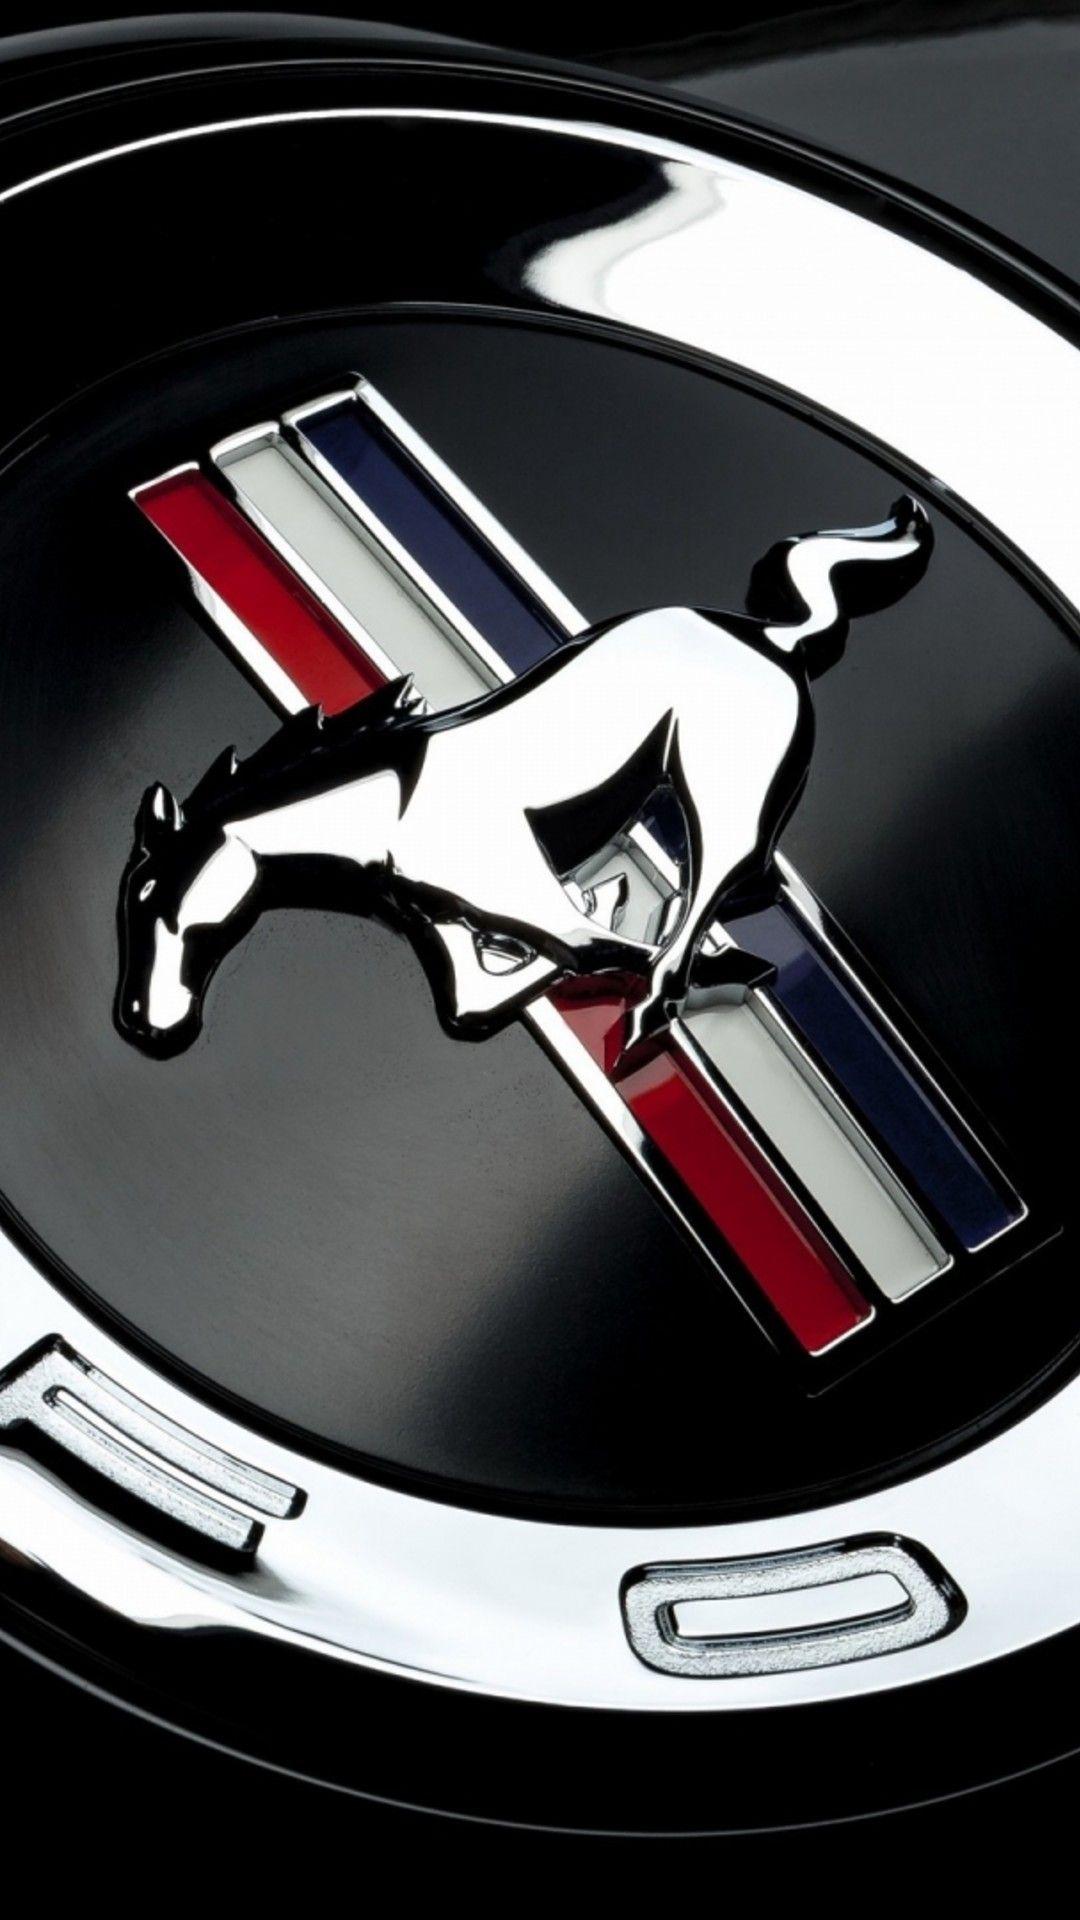 Ford Mustang Shelby Logo. Cheap Ford Mustang Shelby Gtr With Ford